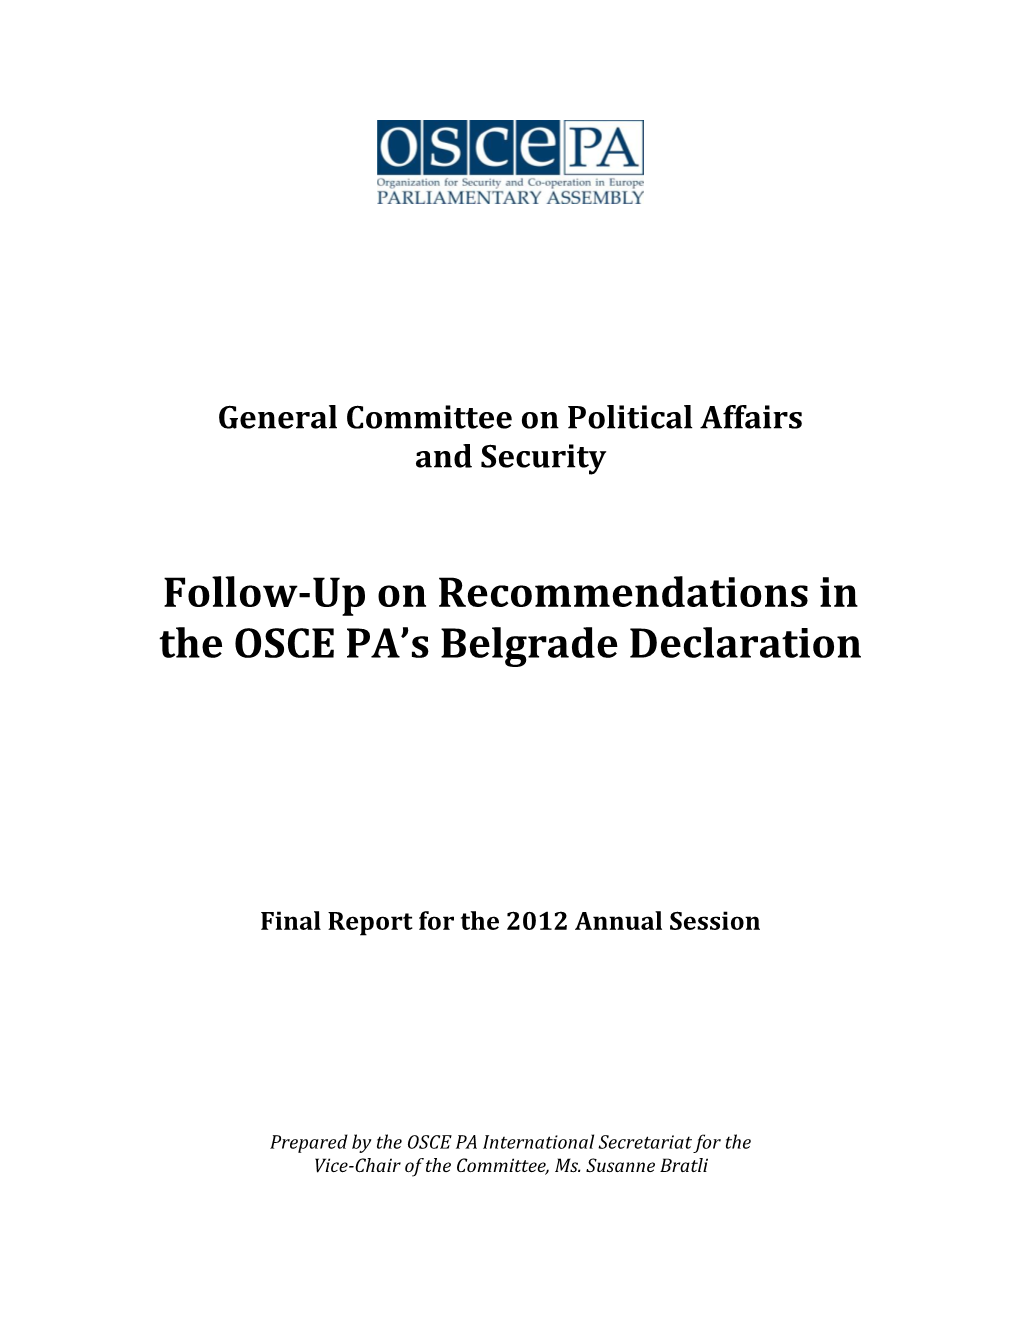 Follow-Up on Recommendations in the OSCE PA's Belgrade Declaration